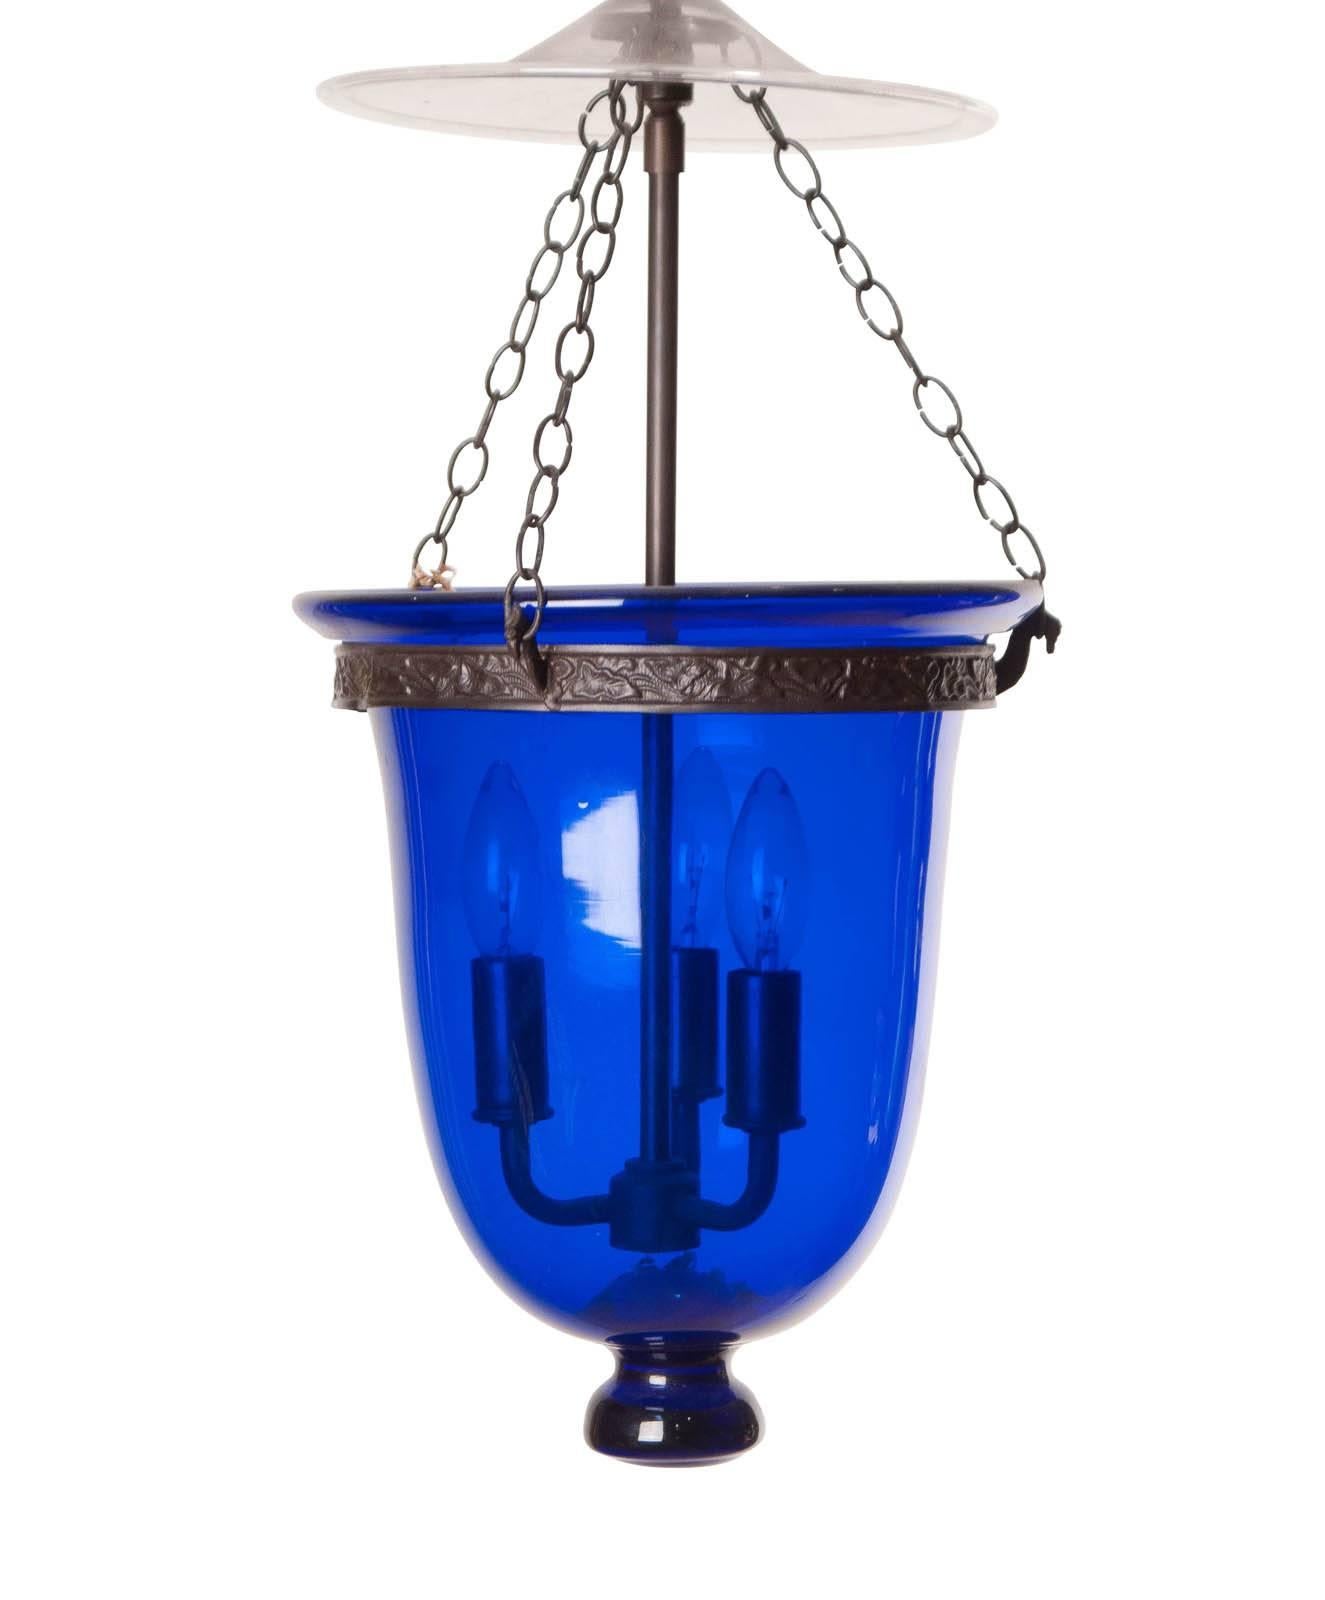 From the collection of a dealer that specialized in decoration from S.E. Asia. This blue glass lantern / bell jar / hundi, was made in or around India, circa 1860. The clear glass cover is antique but associated. The wiring is recent and in good